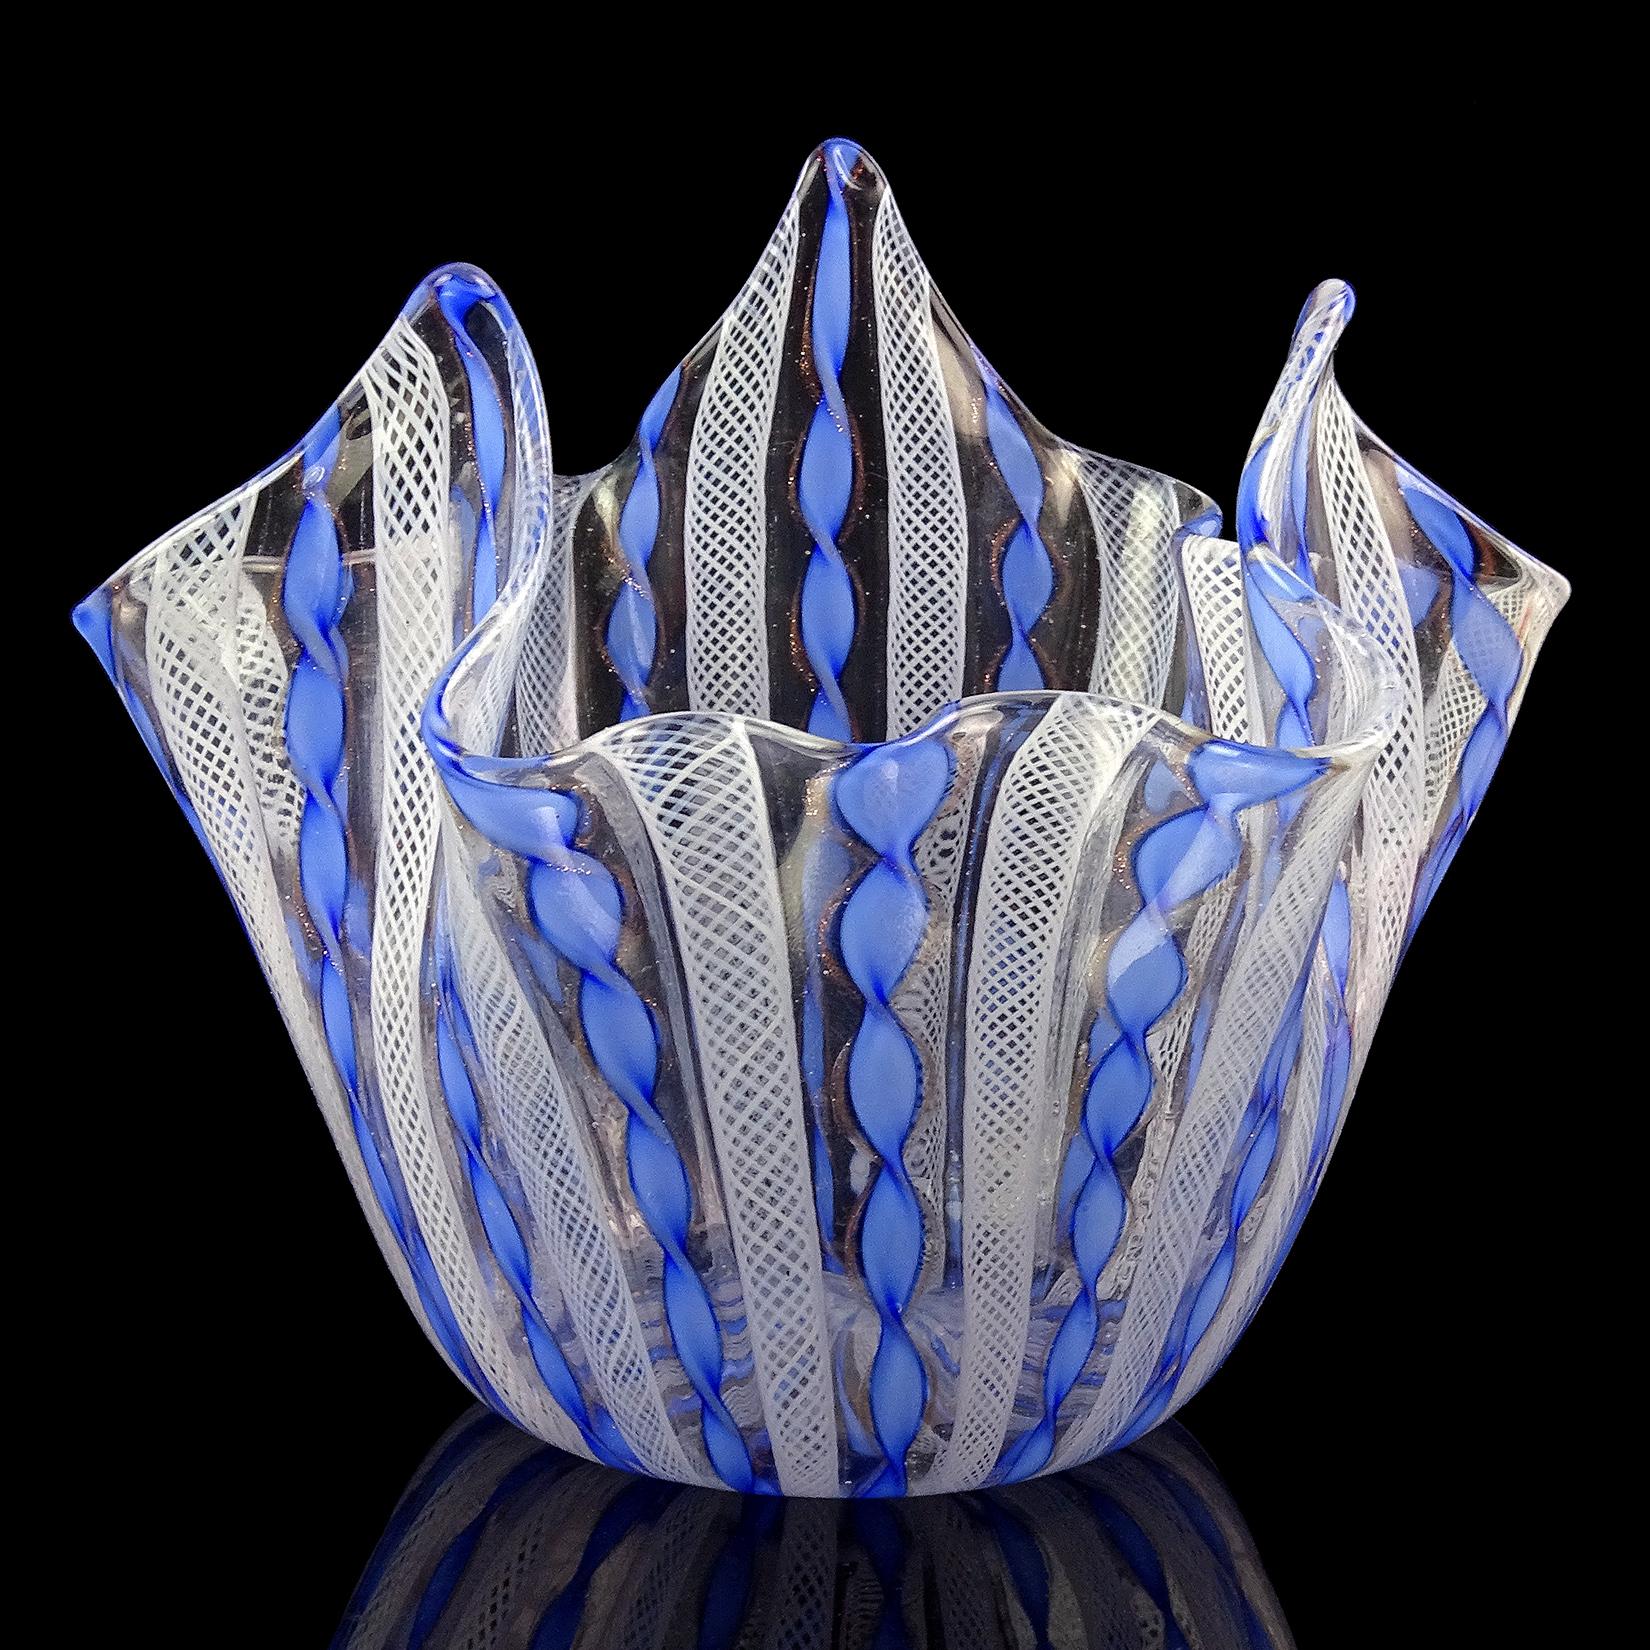 Beautiful vintage Murano hand blown blue, aventurine and white Italian art glass fazzoletto flower vase. Documented to the Fratelli Toso company. The piece is made with twisting blue and copper aventurine fleck ribbons, and white net Zanfirico in an